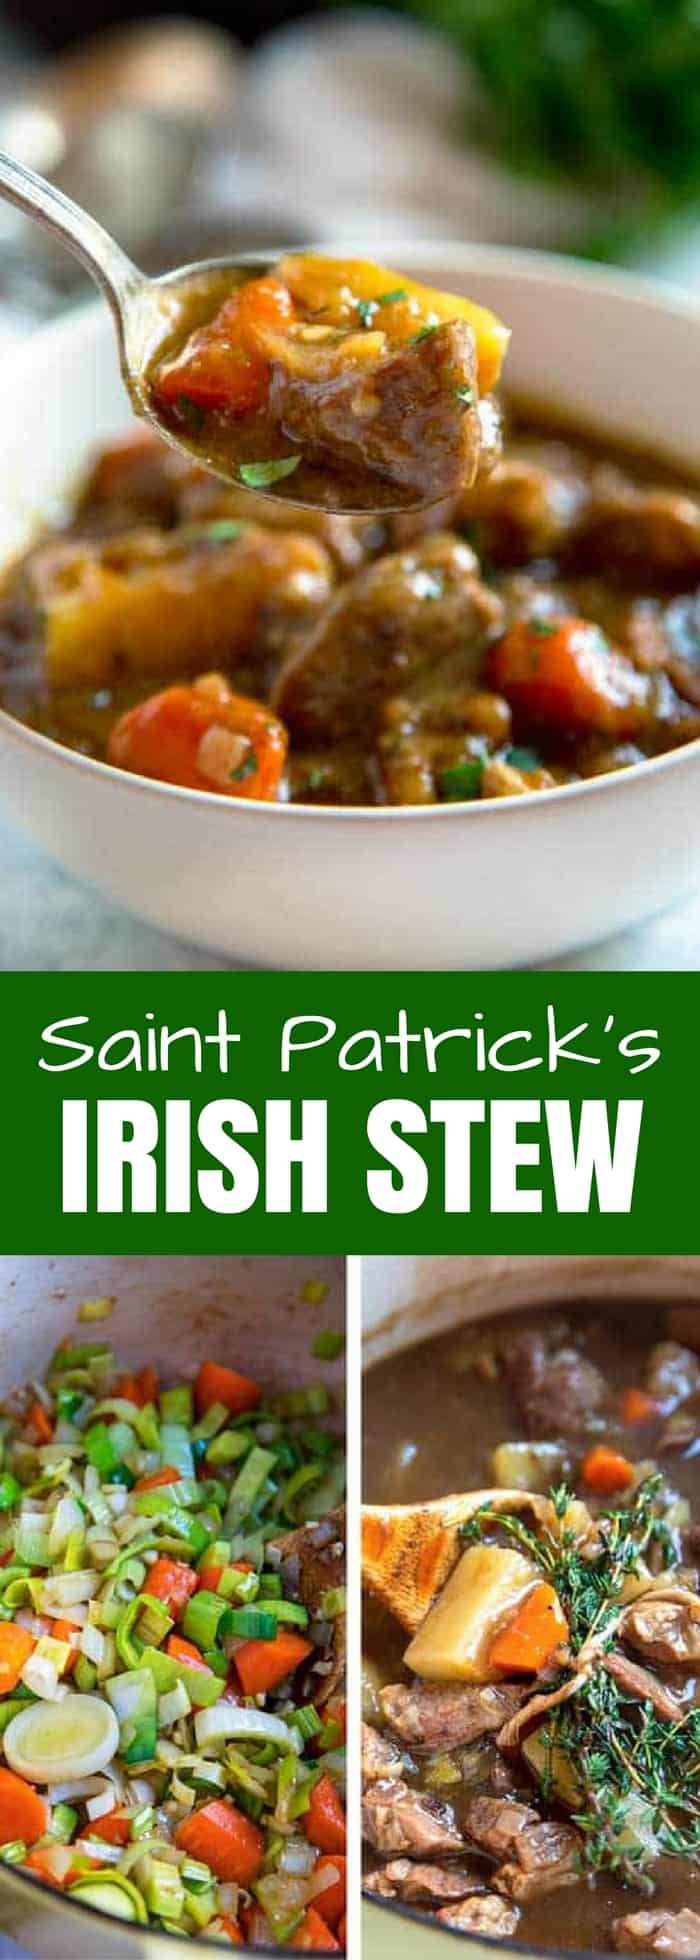 Irish Stew is pure comfort food and a classic recipe using browned lamb, onions, potatoes and thyme that simmer and develop a rich gravy made with beer and beef broth. Beef can easily be substituted for the lamb, too.